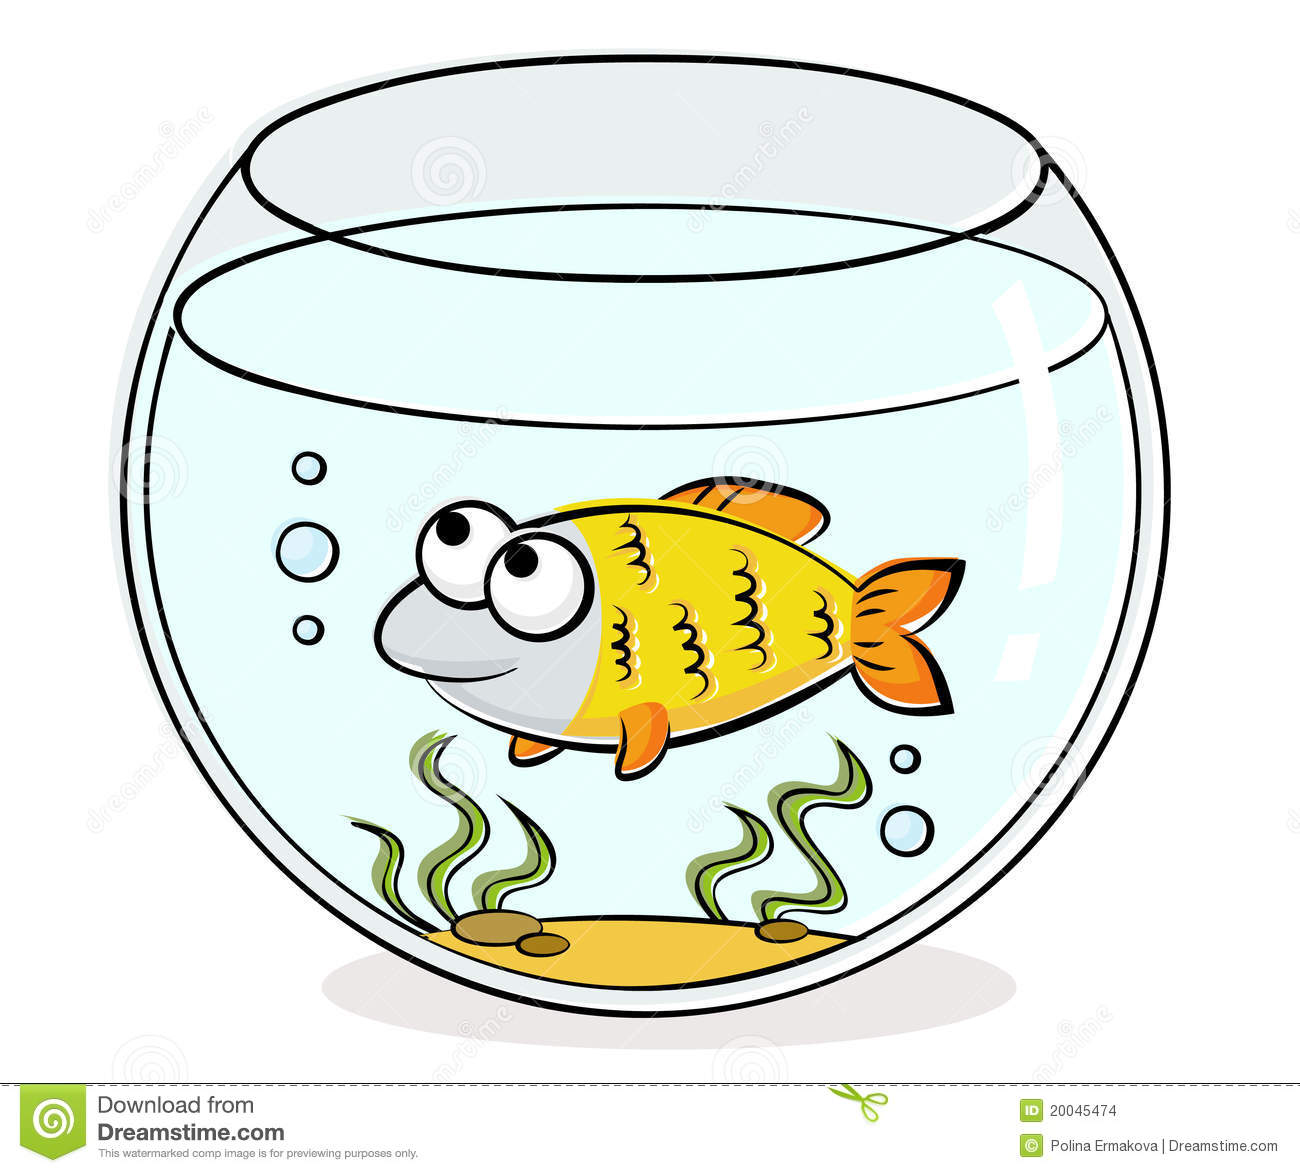 Fishing clipart fishing competition. Aquarium fish clipground house